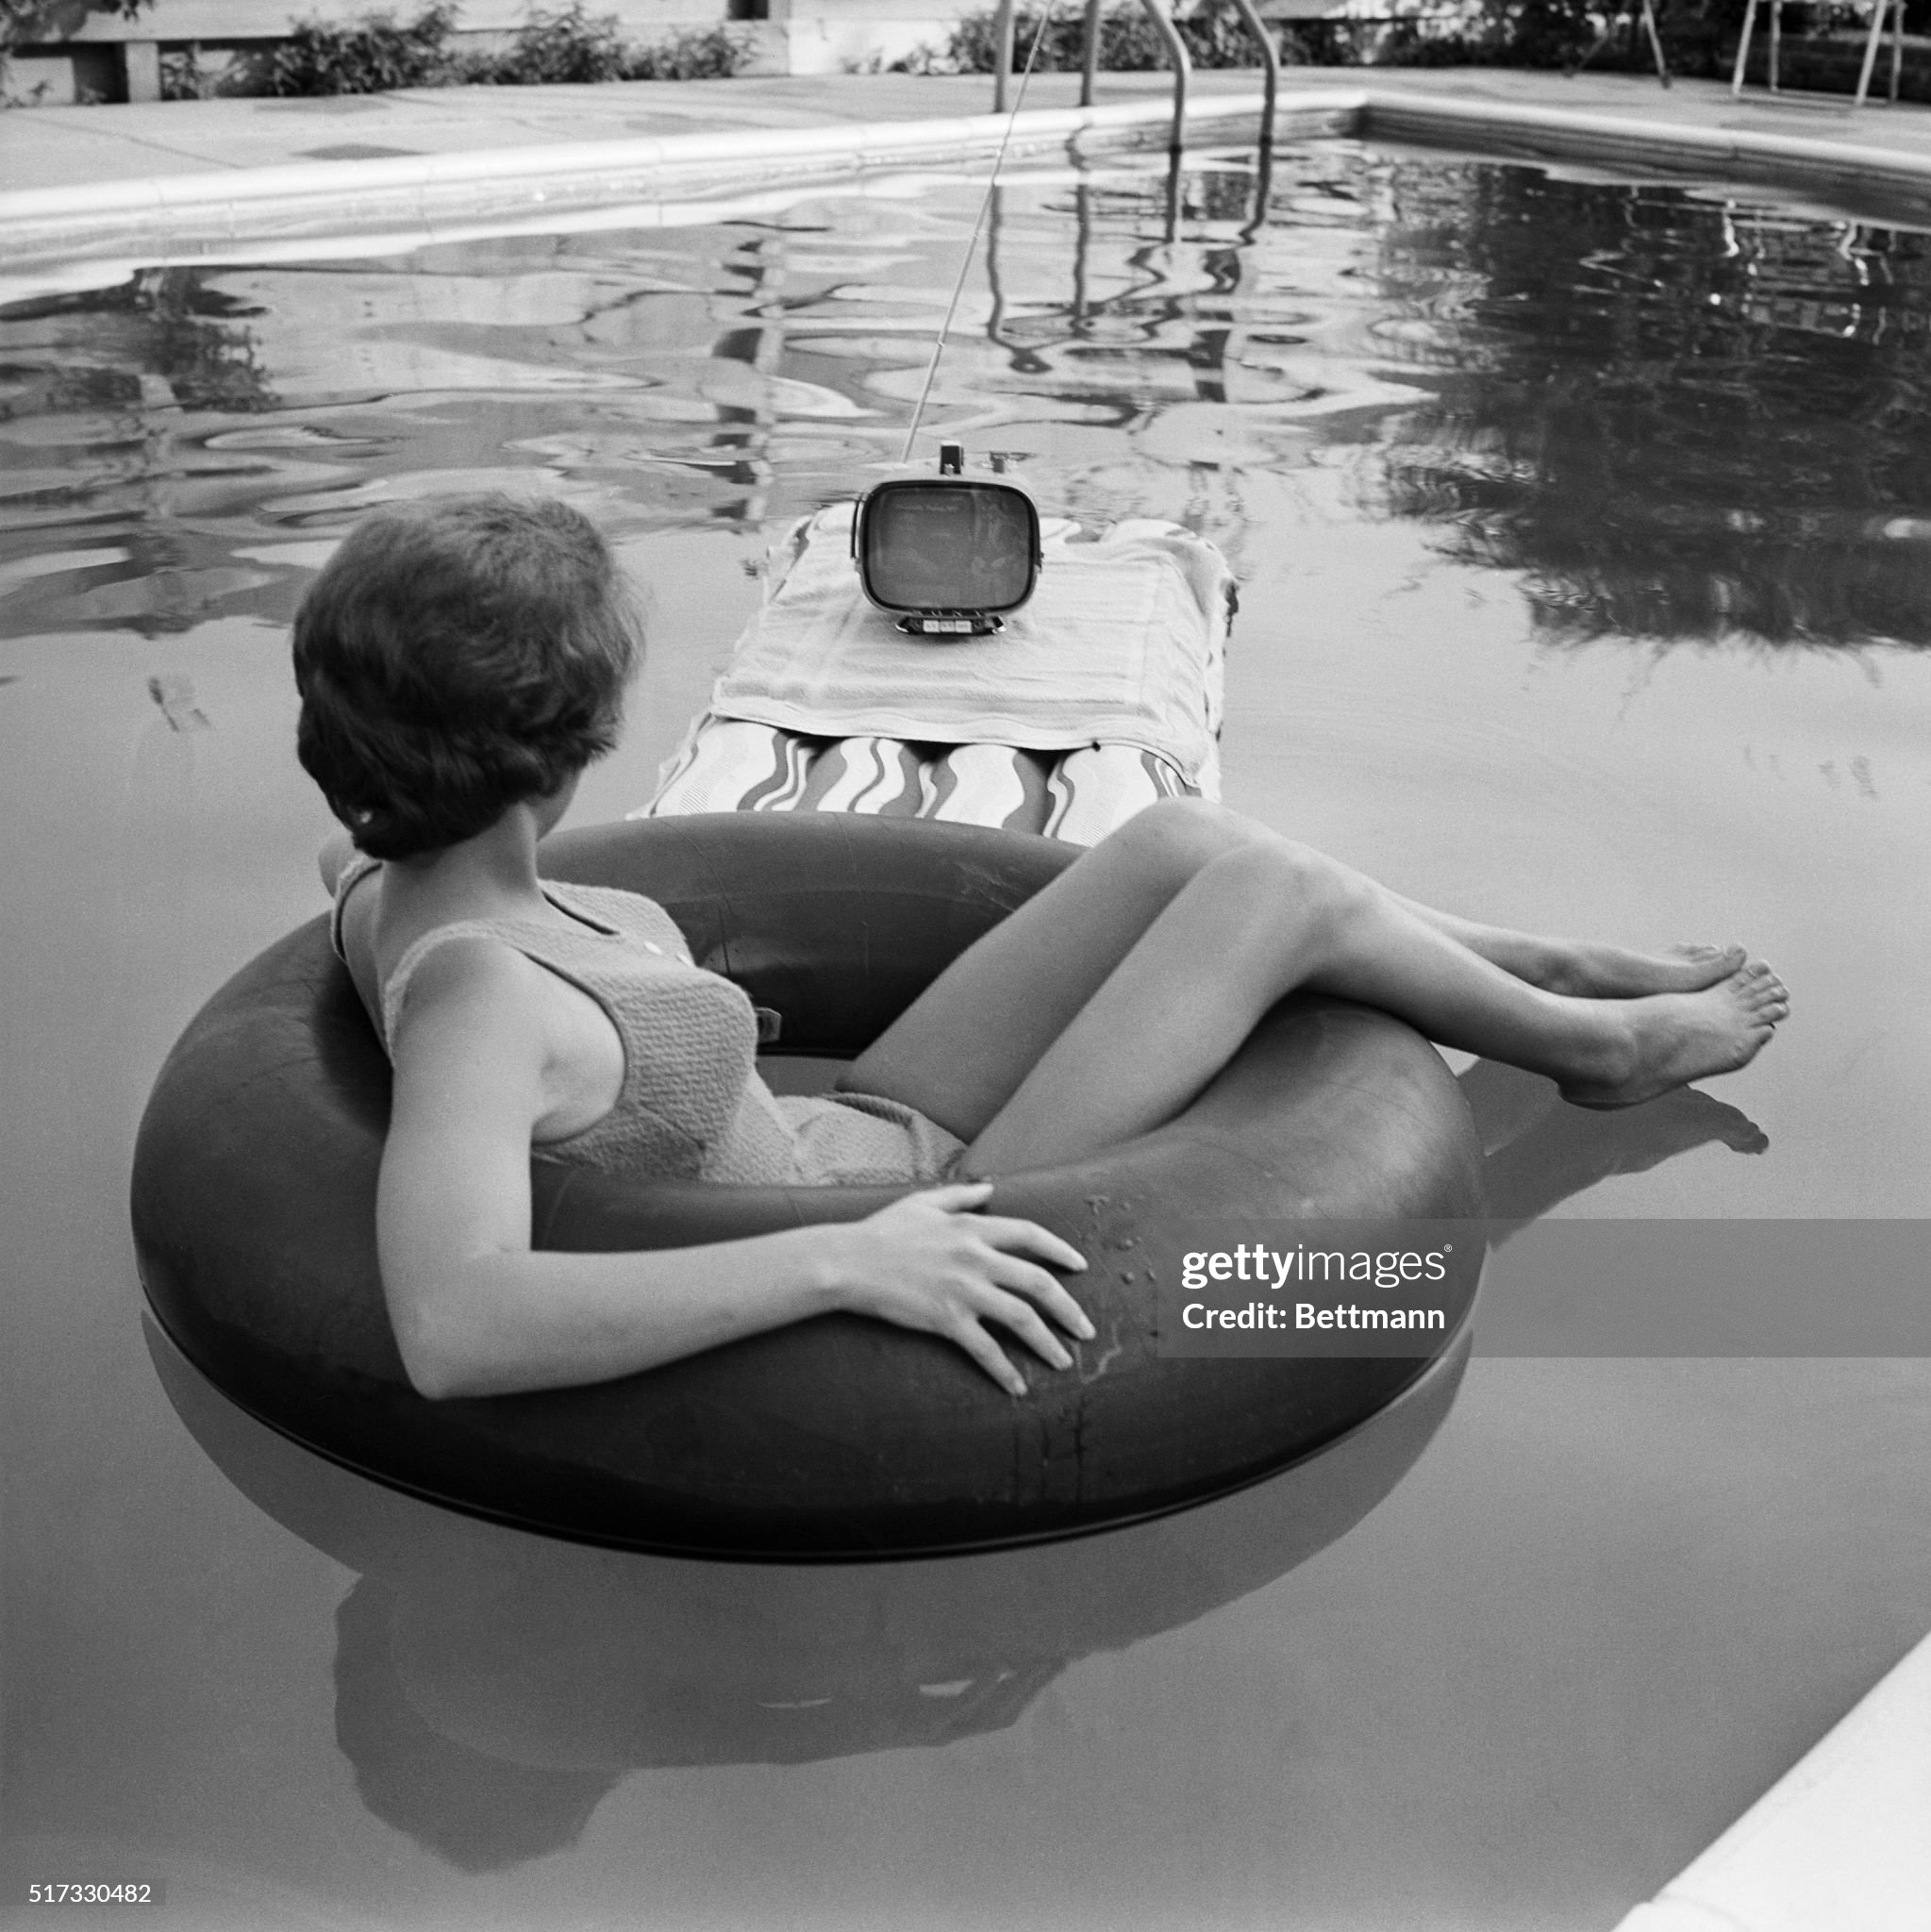 August 01, 1962. Nineteen year old Joyce McGee relaxes in front of the television while cooling off in the swimming pool. 